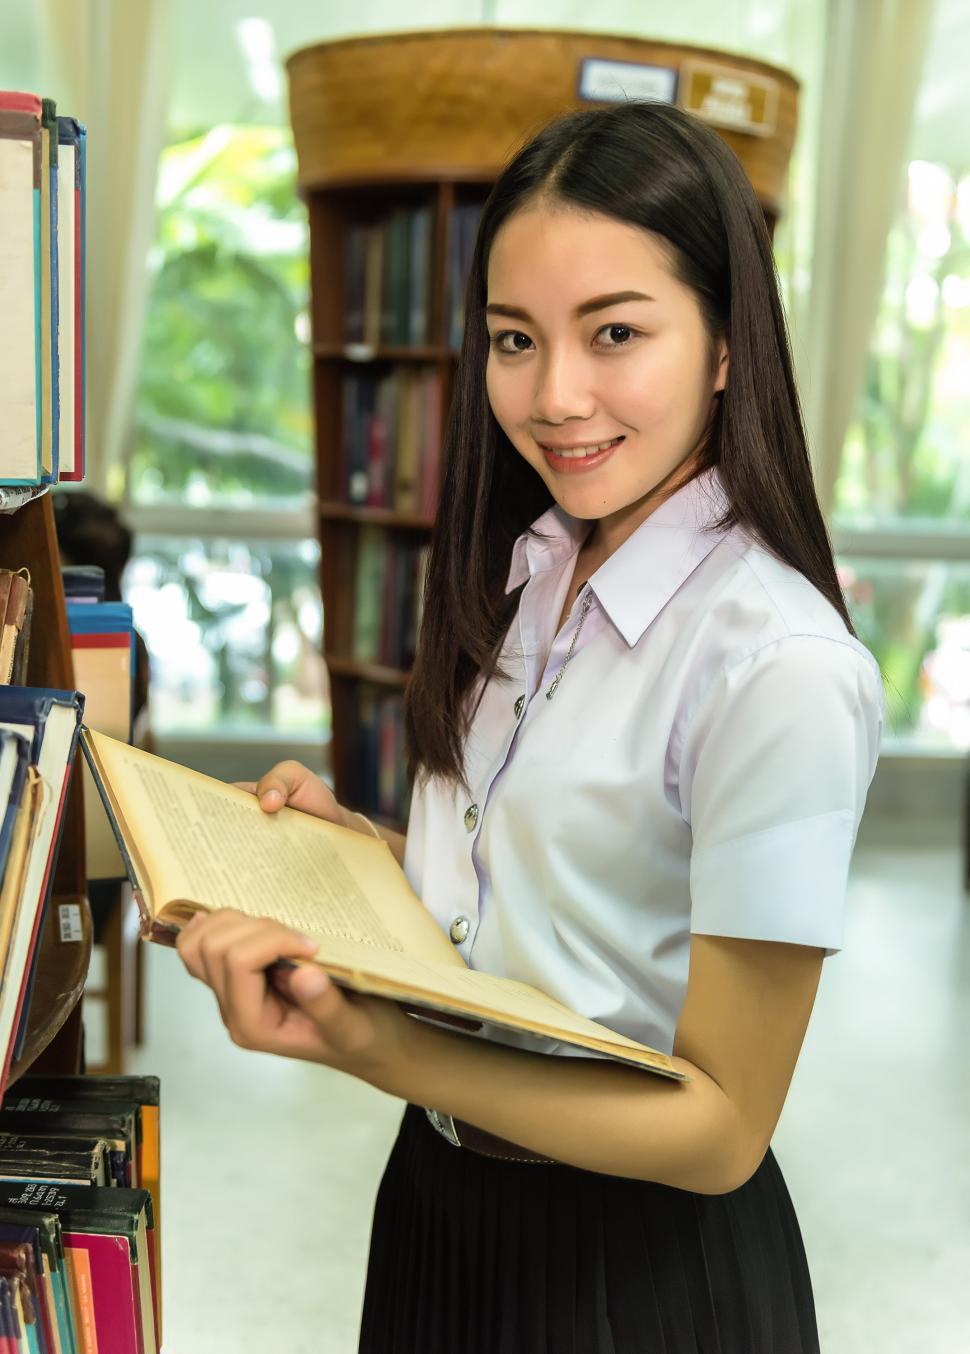 Free Image of Woman Holding Book in Library 